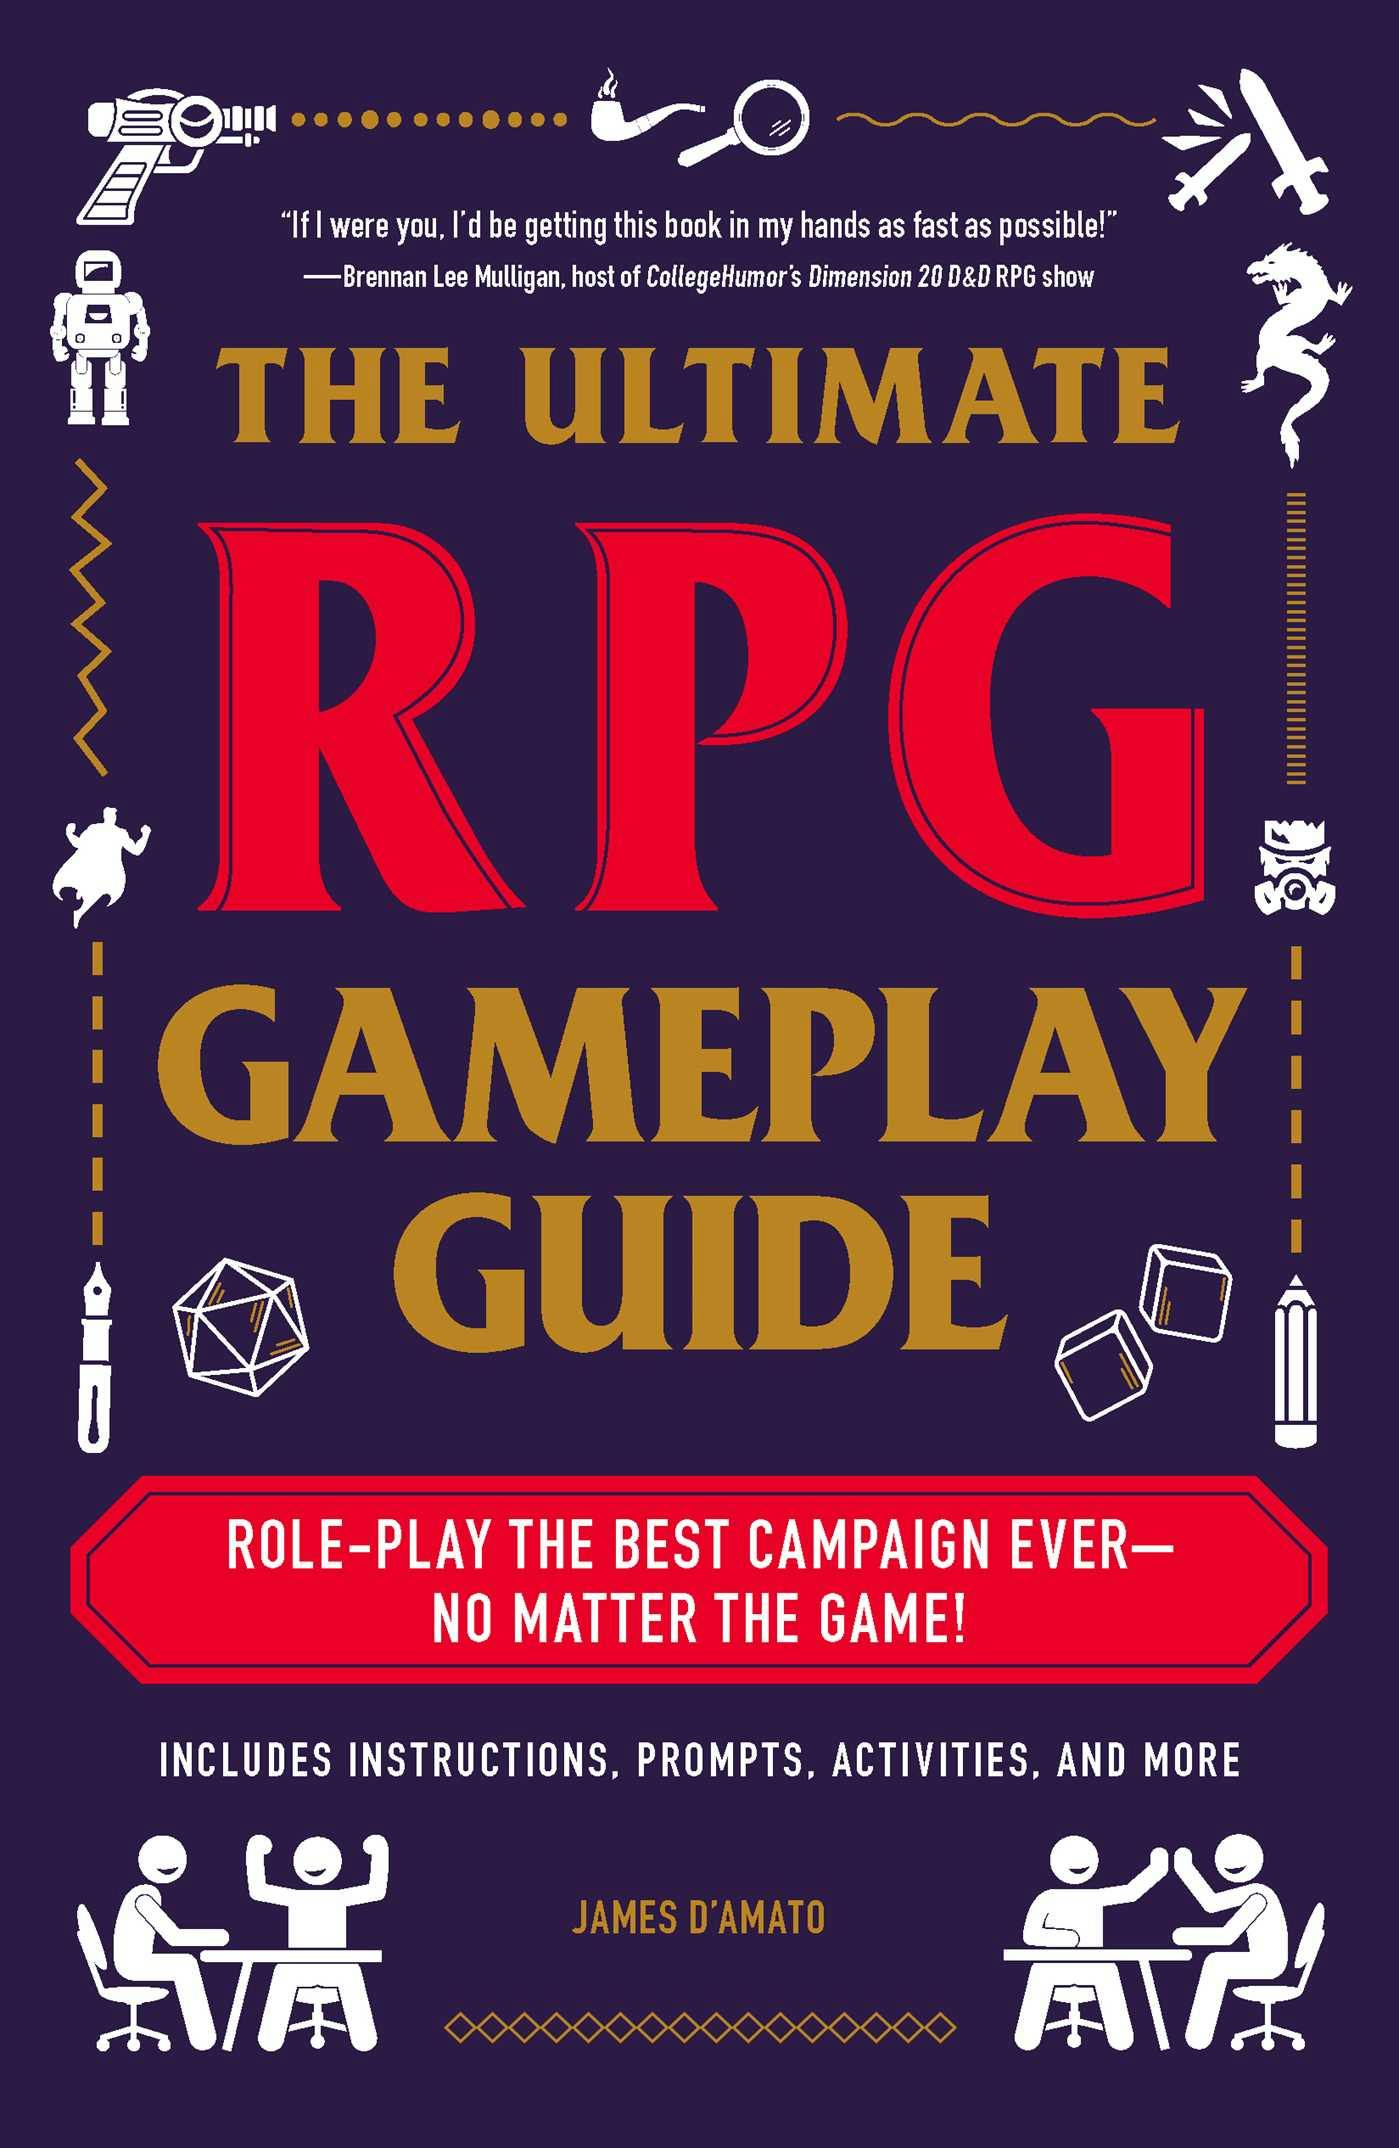 The Ultimate RPG Gameplay Guide: Role-Play the Best Campaign Ever—No Matter the Game! - James D’Amato